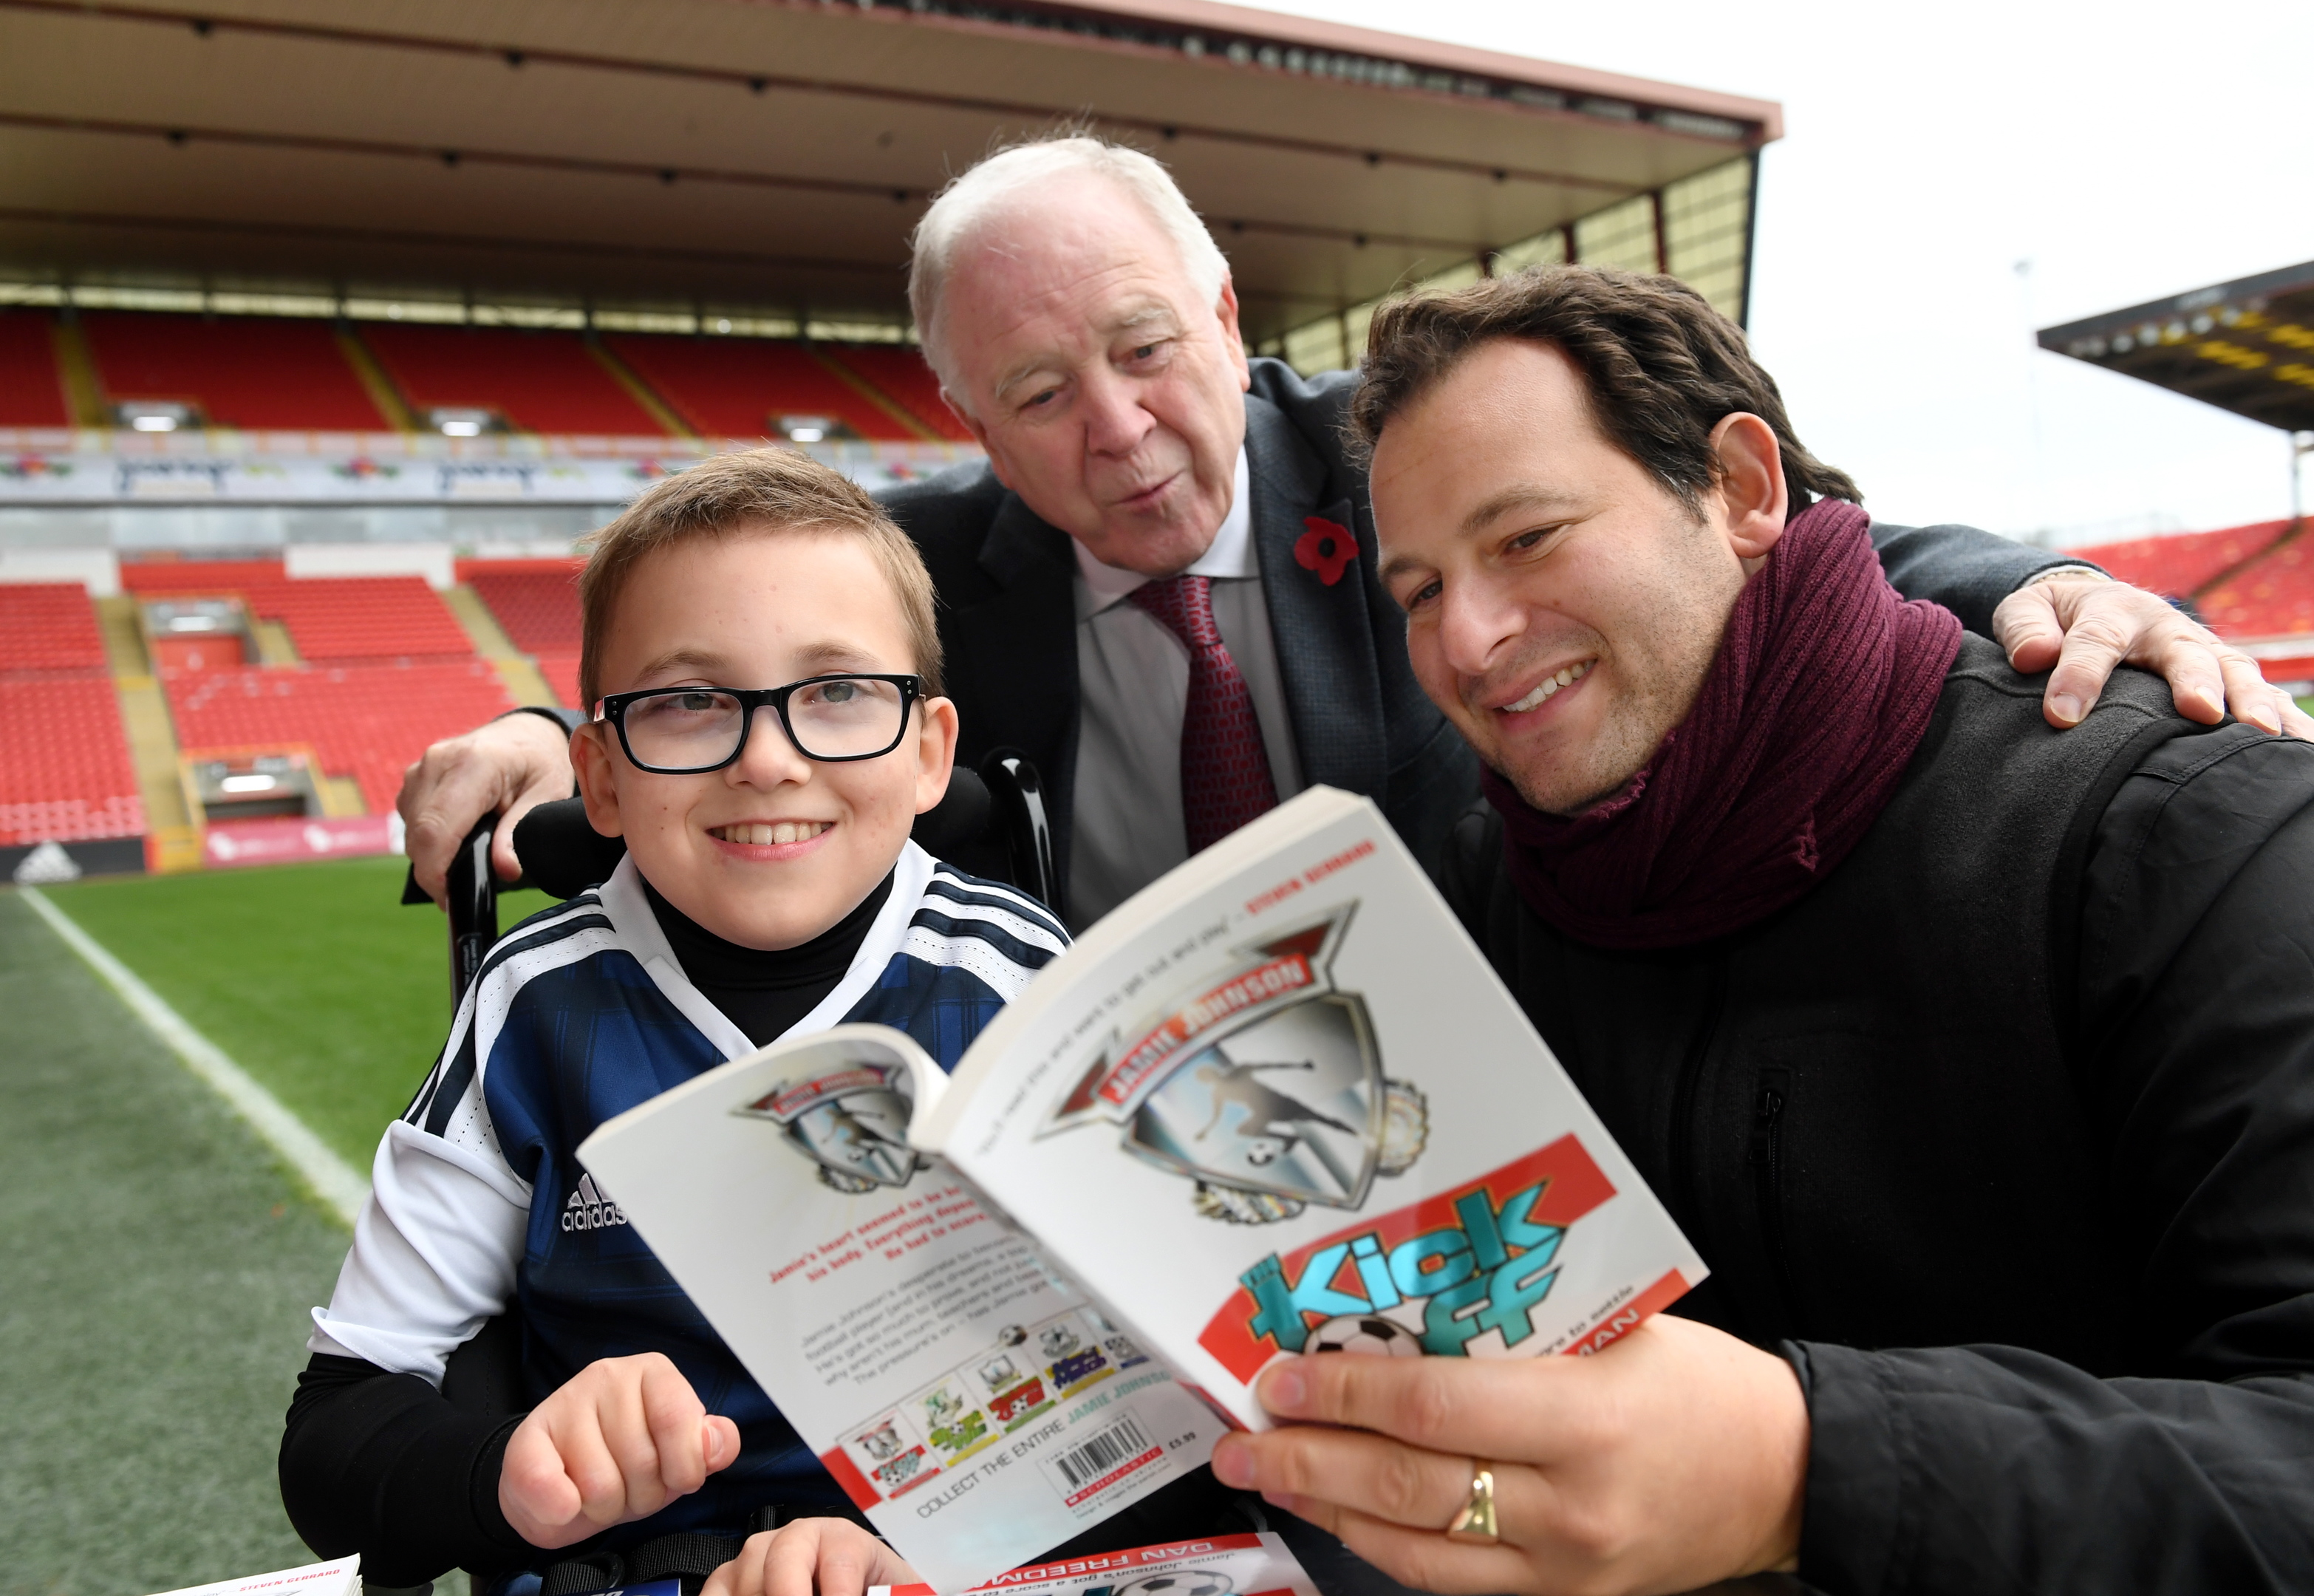 Finlay Sangster meets children's author Dan Freedman (right) and former Scotland and Aberdeen manager Craig Brown, at Pittodrie Stadium.